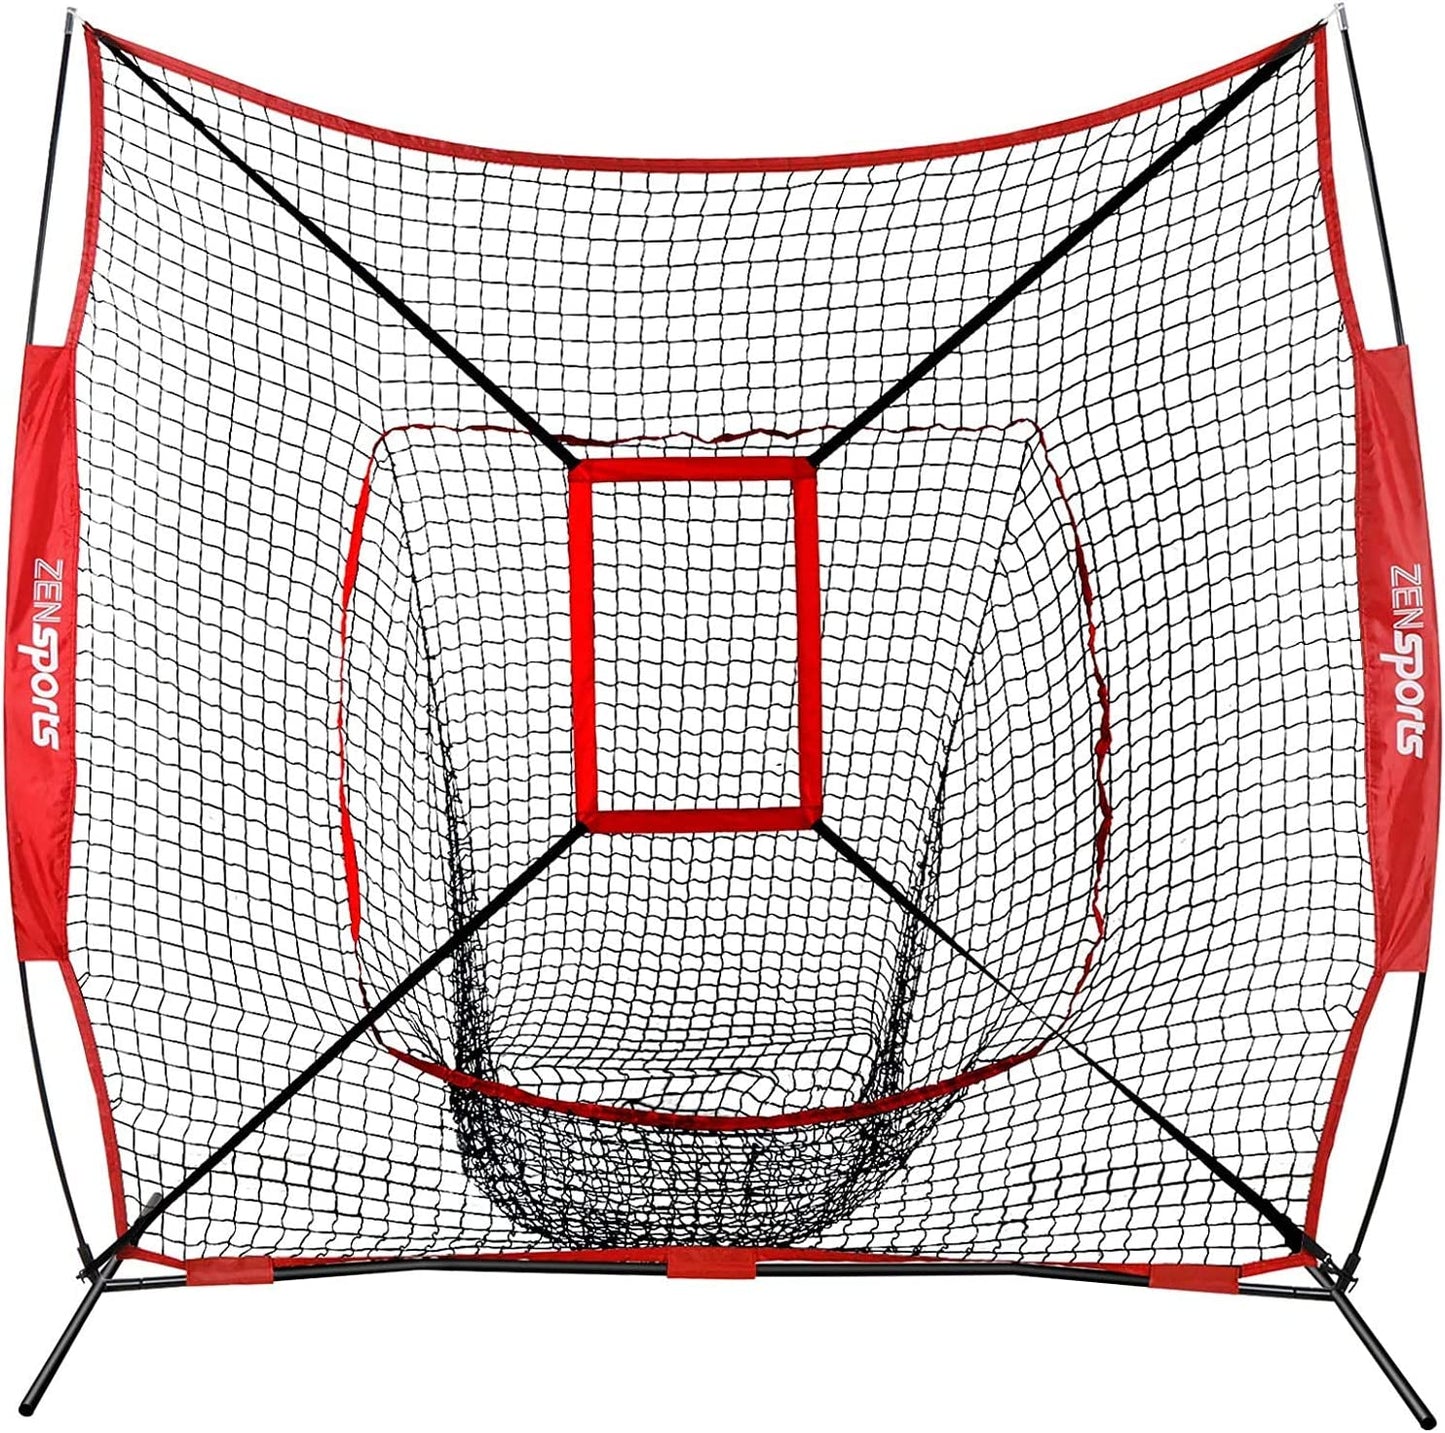 Baseball Softball Practice Hitting Net with Batting Tee Pratice Pitching Batting Fielding with Strike Zone Target and Carrying Bag